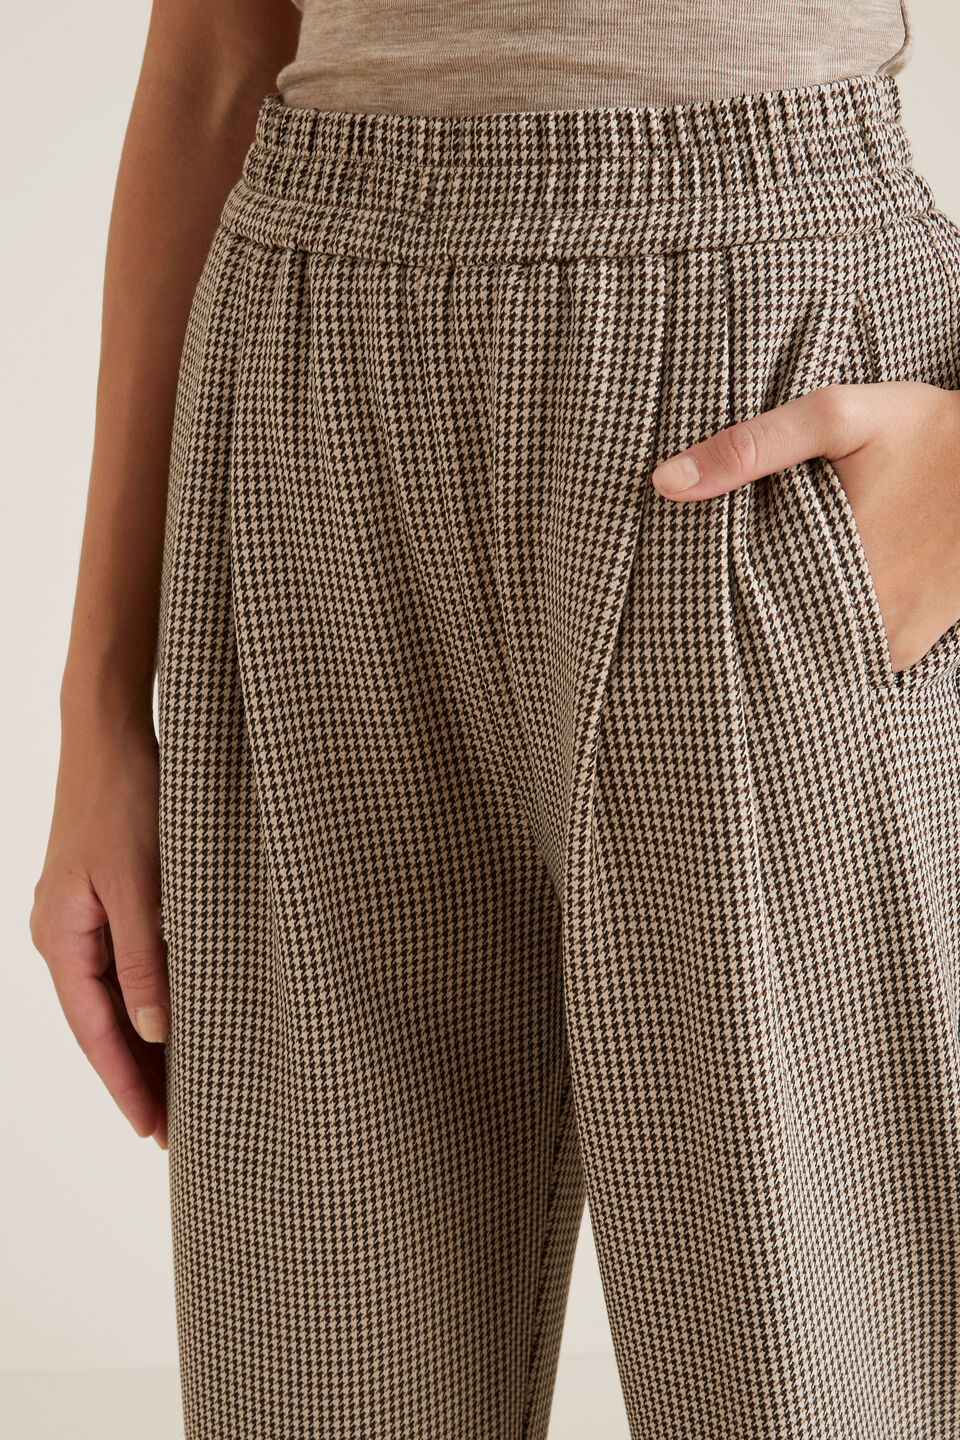 Multi Houndstooth Pant  